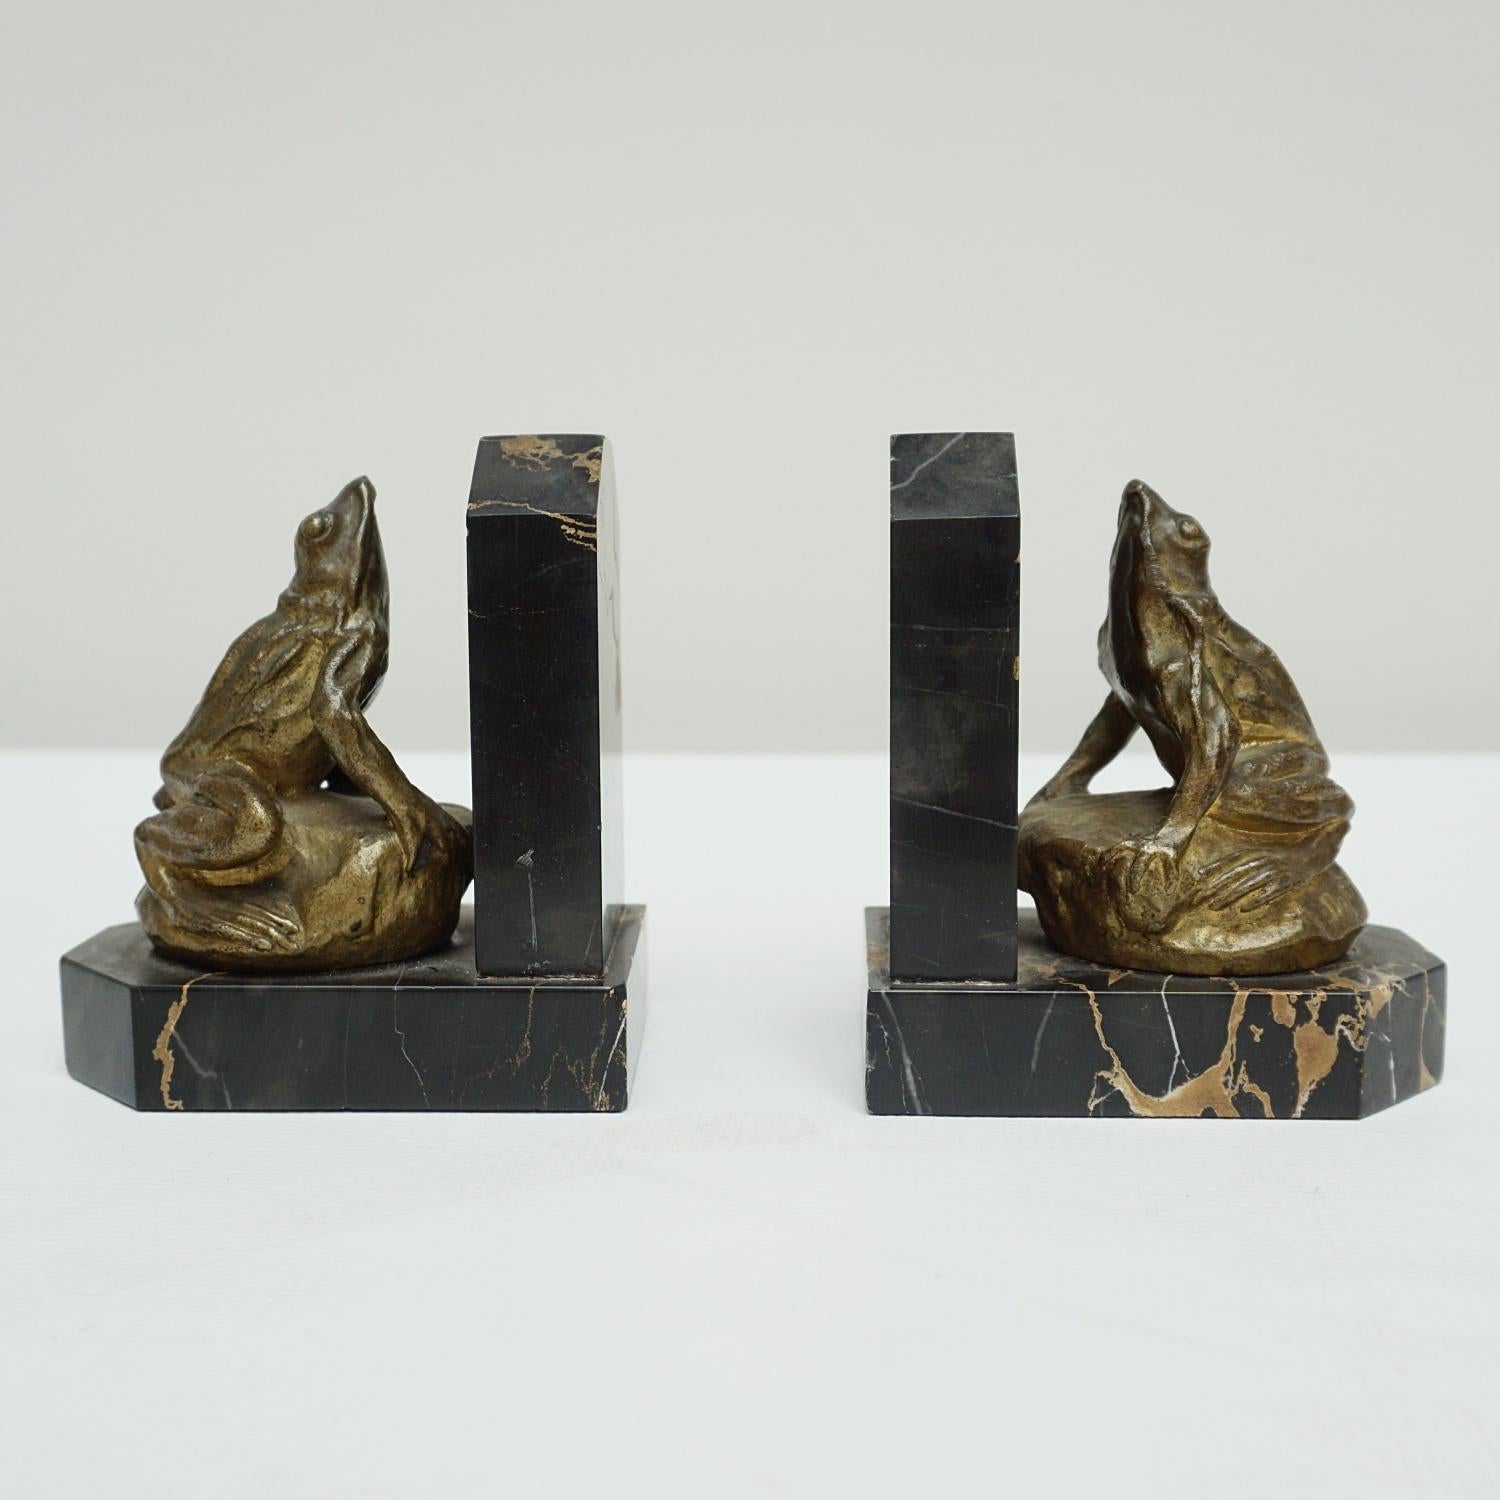 A Pair of Art Deco bookends by Antoine Bofill (1875-1925). Solid bronze Frogs set on marble bases. Signed 'Bofill' to bronze. 

Dimensions: H 11cm W 10cm D 7.3cm 

Origin: French

Date: Circa, 1920

Item Number: 2906223.